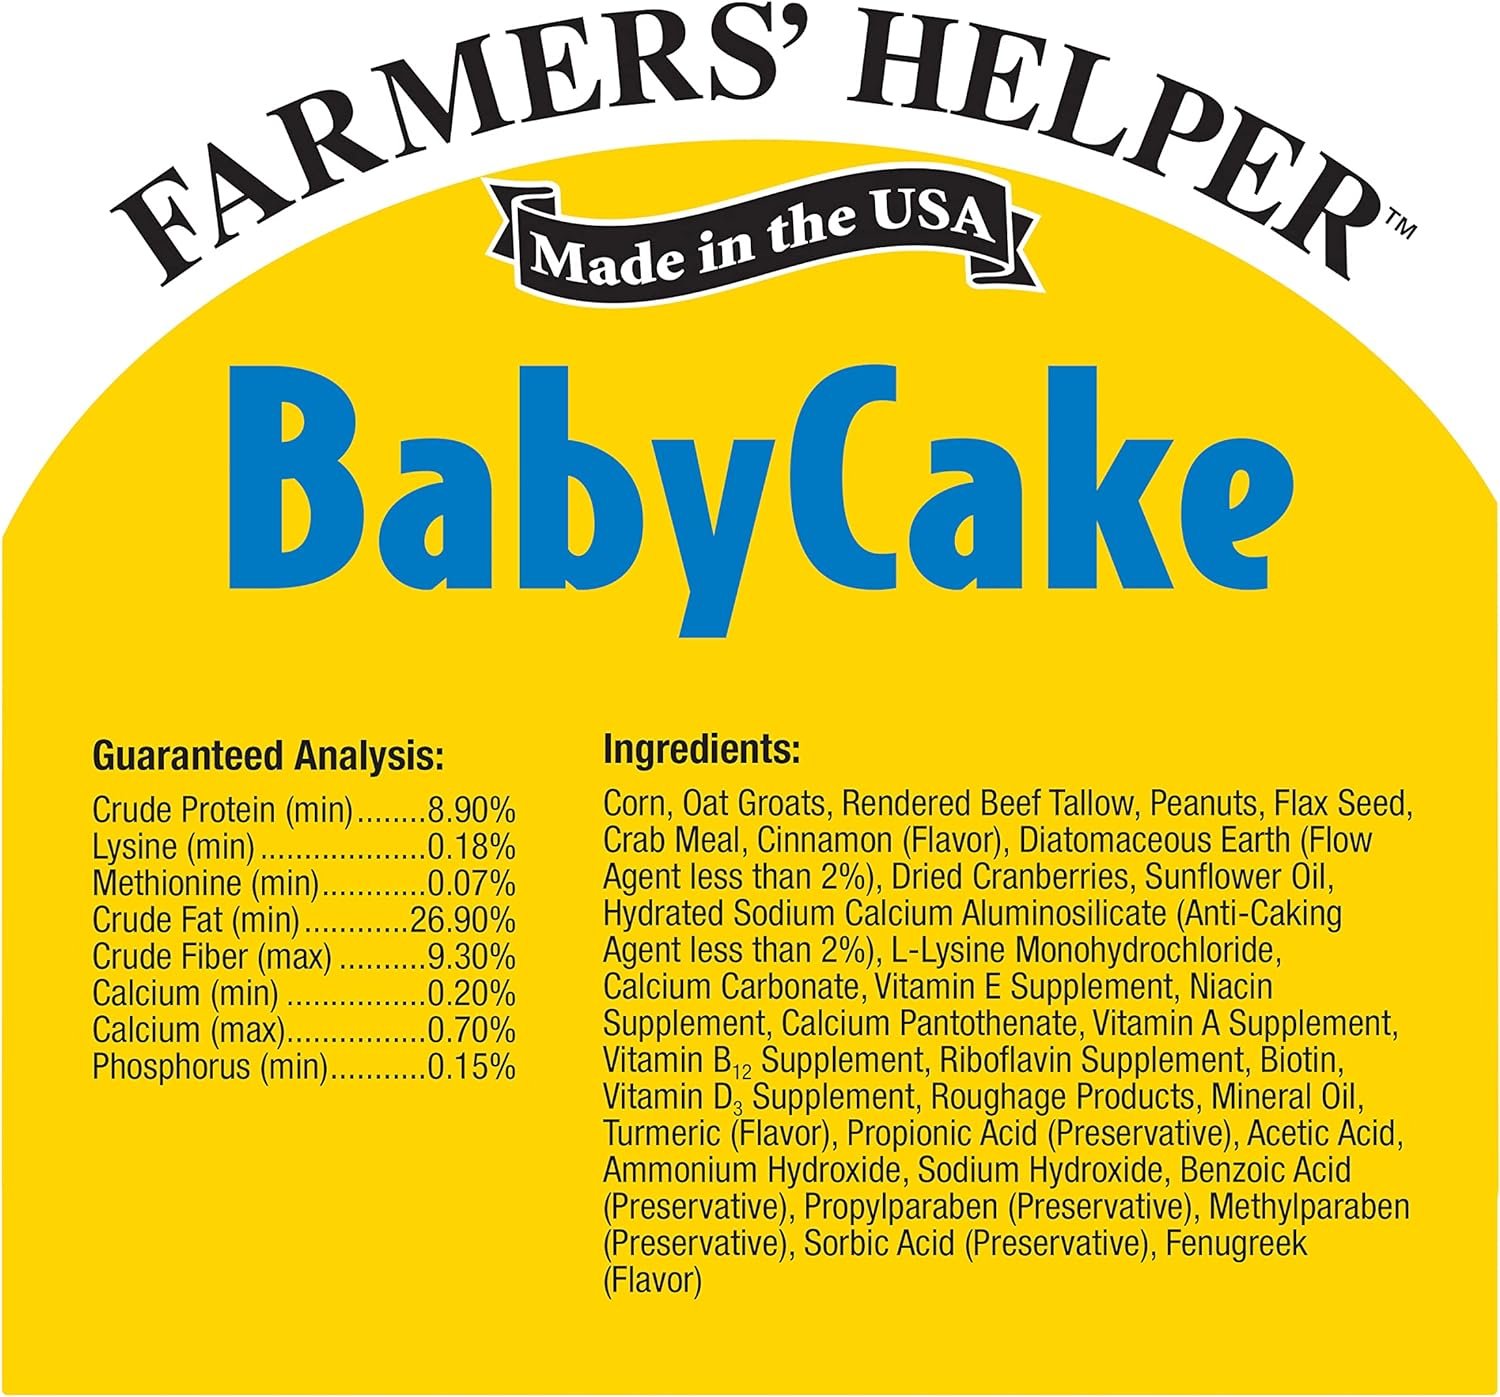 Farmers Helper Baby Cake Specially Formulated Food For Baby Chickens, Turkeys, Peafowl, Guinea Fowl, Geese, Quail, Pheasants, and Ducks, 15 Ounce